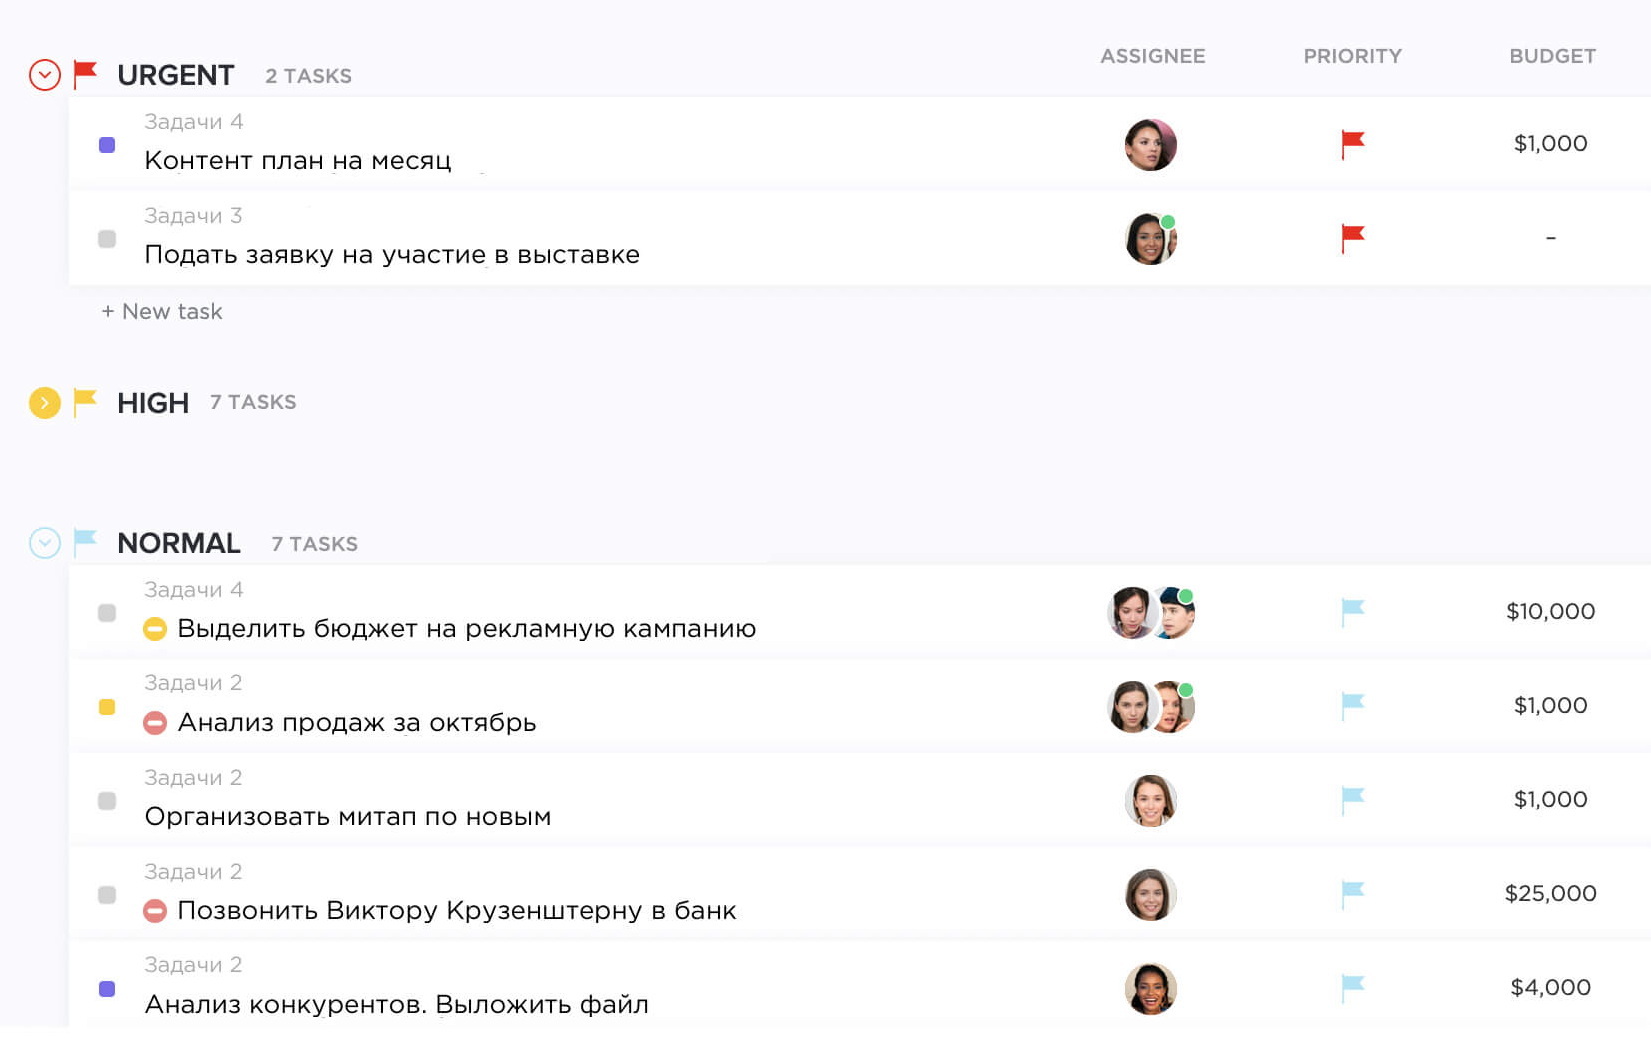 22 project management systems available in the Russian Federation - My, Control, Marketing, Marketers, Small business, Business in Russian, Businessmen, Project management, Project management, IT, A selection, Online Service, Overview, Import substitution, Business, IT projects, Scheduling tasks, Book of problems, Remote work, System, Longpost